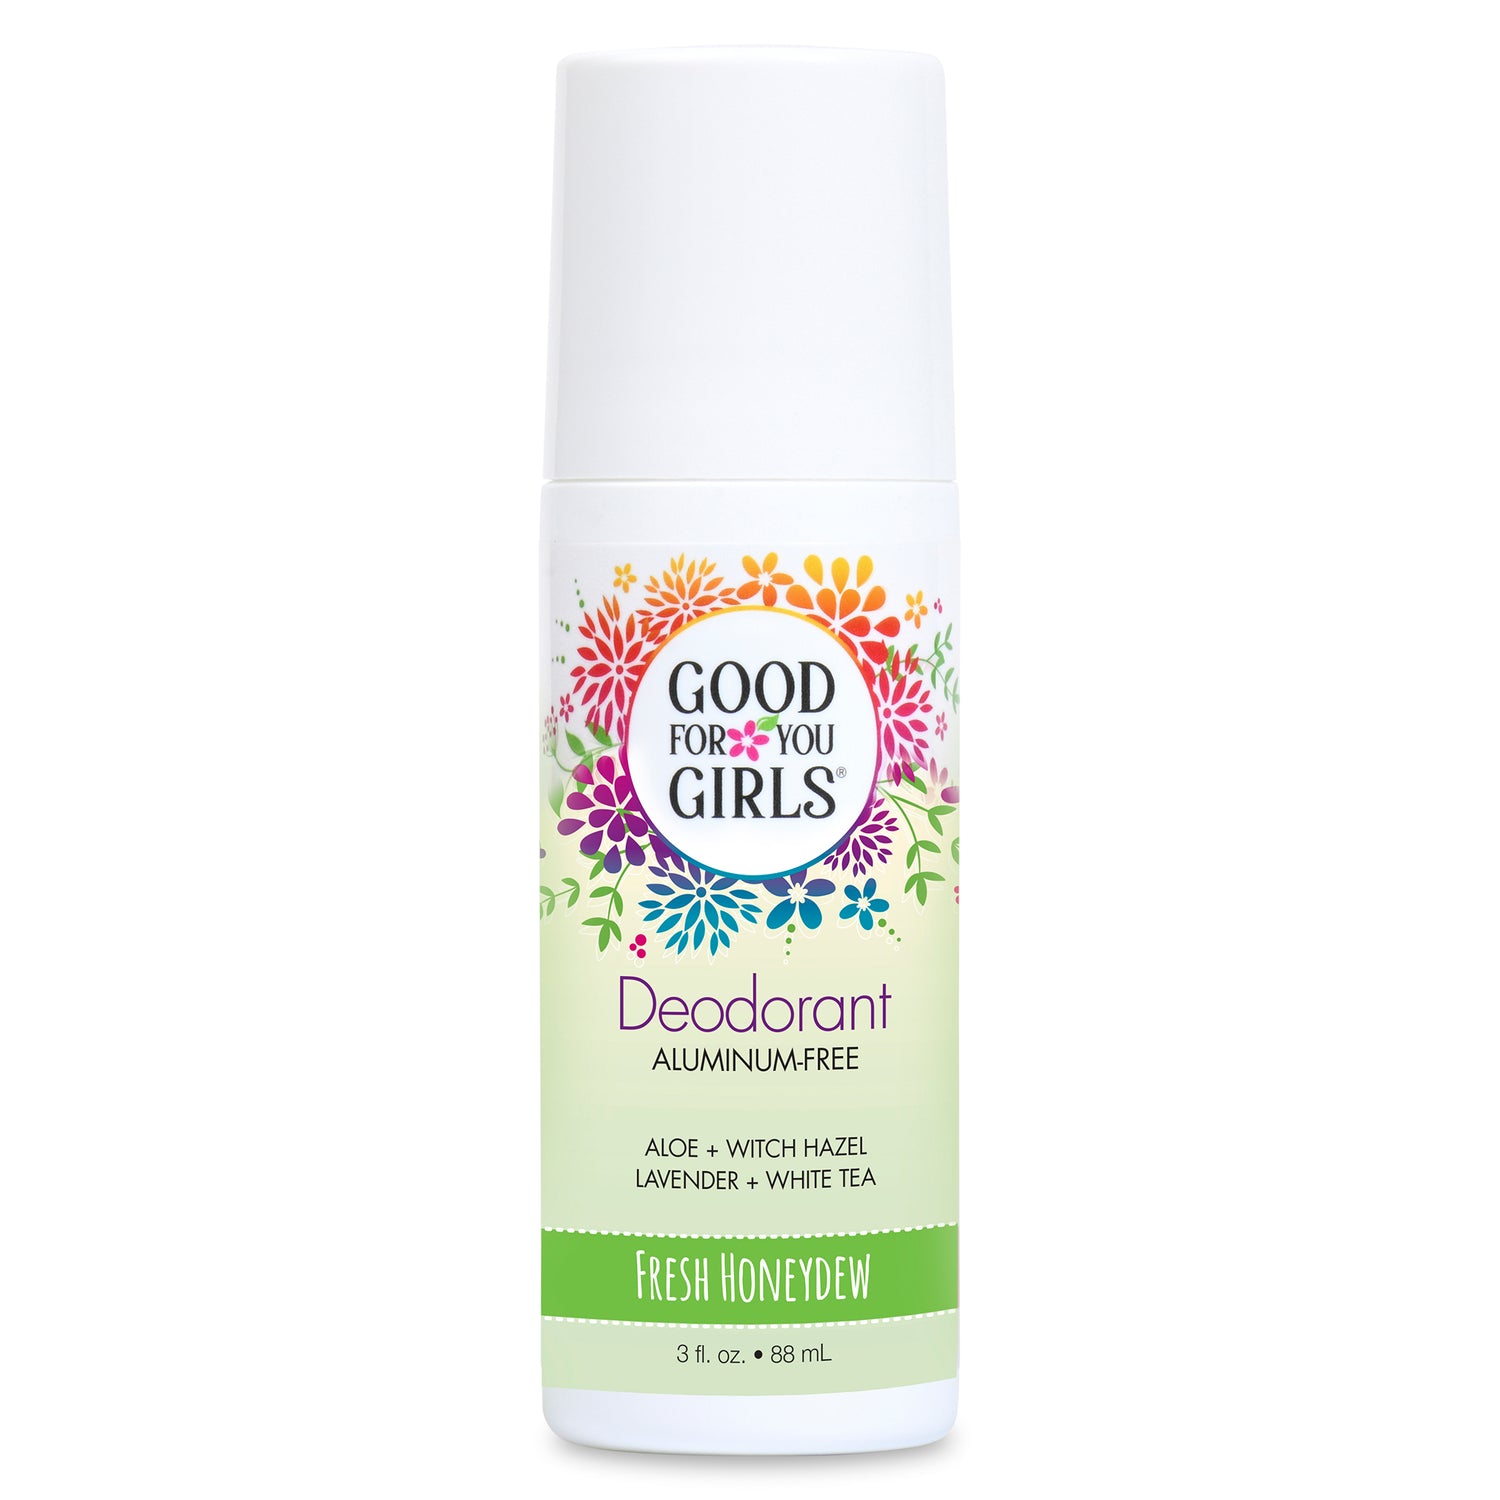 Aluminum-Free Roll On Deodorant for girls, pre-teens, teens – Good For You